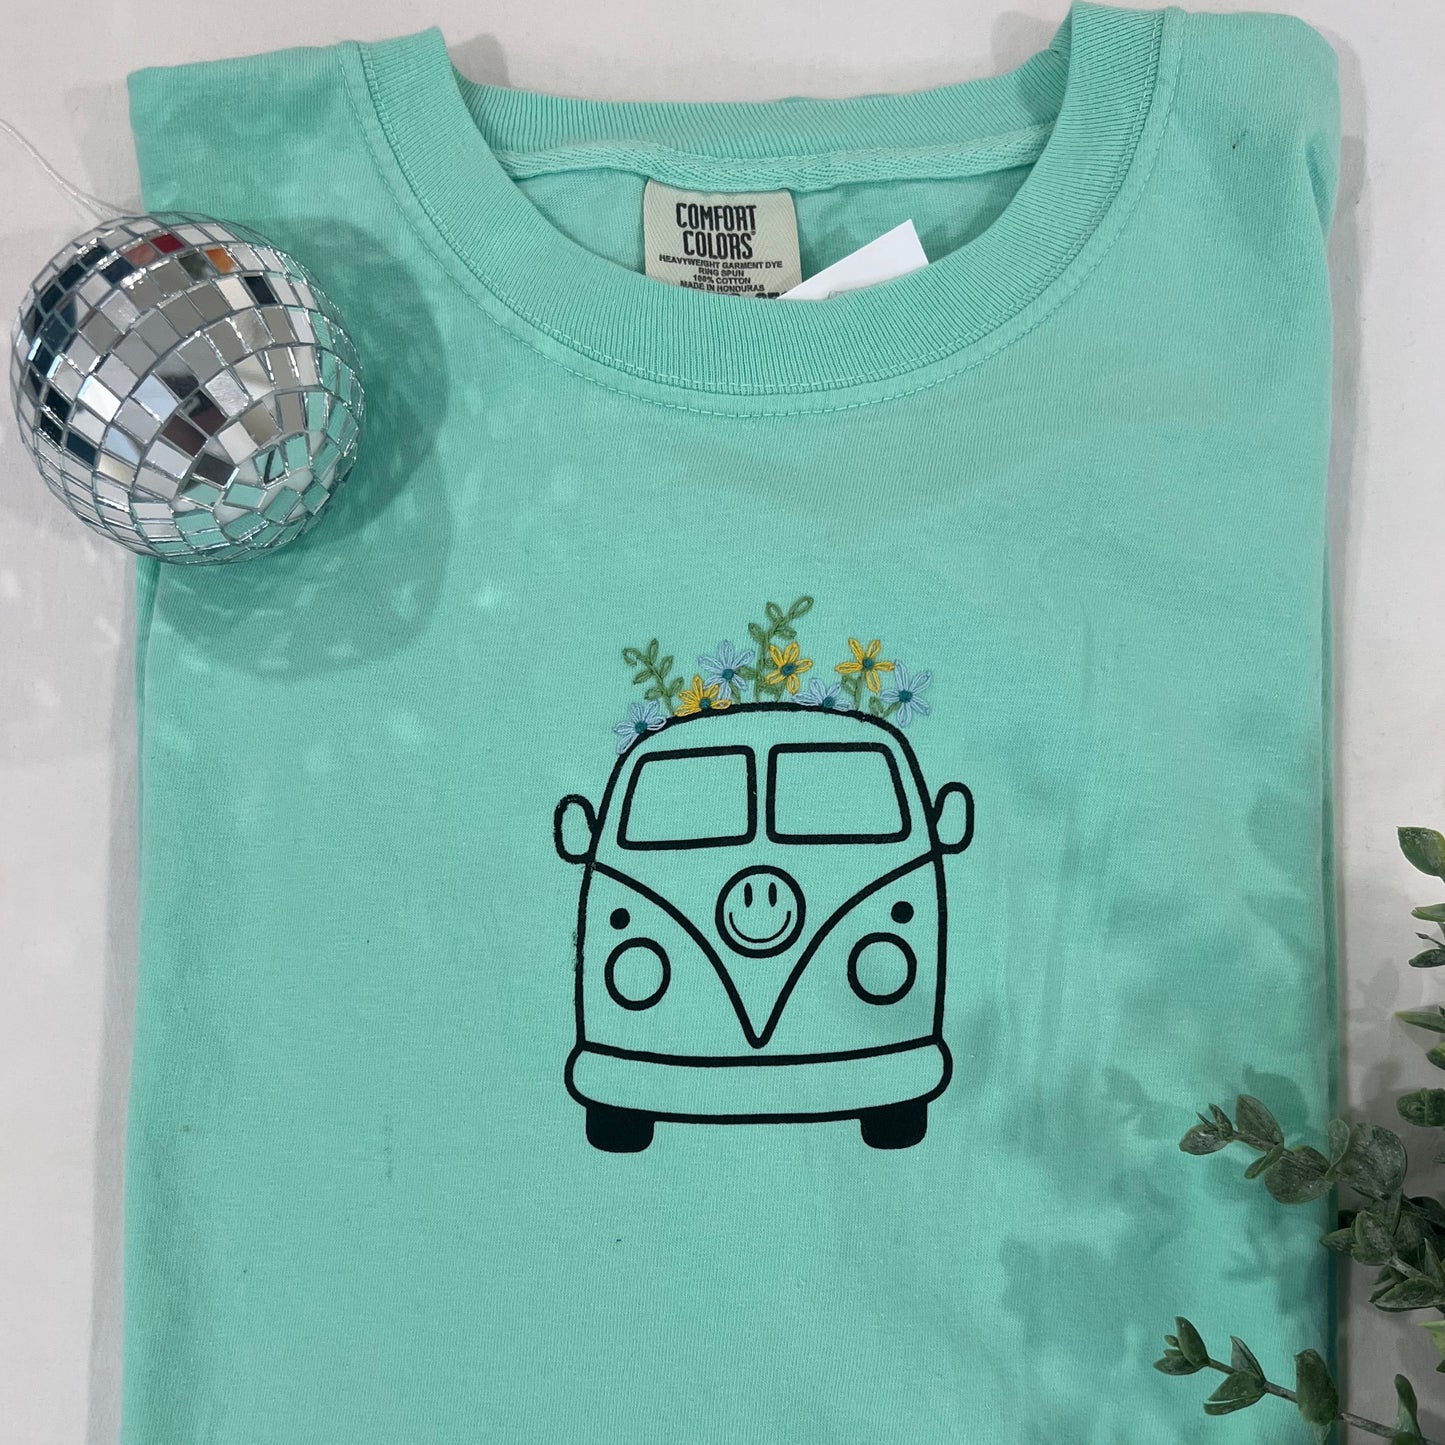 Groovy Bus Hand Embroidered Shirt